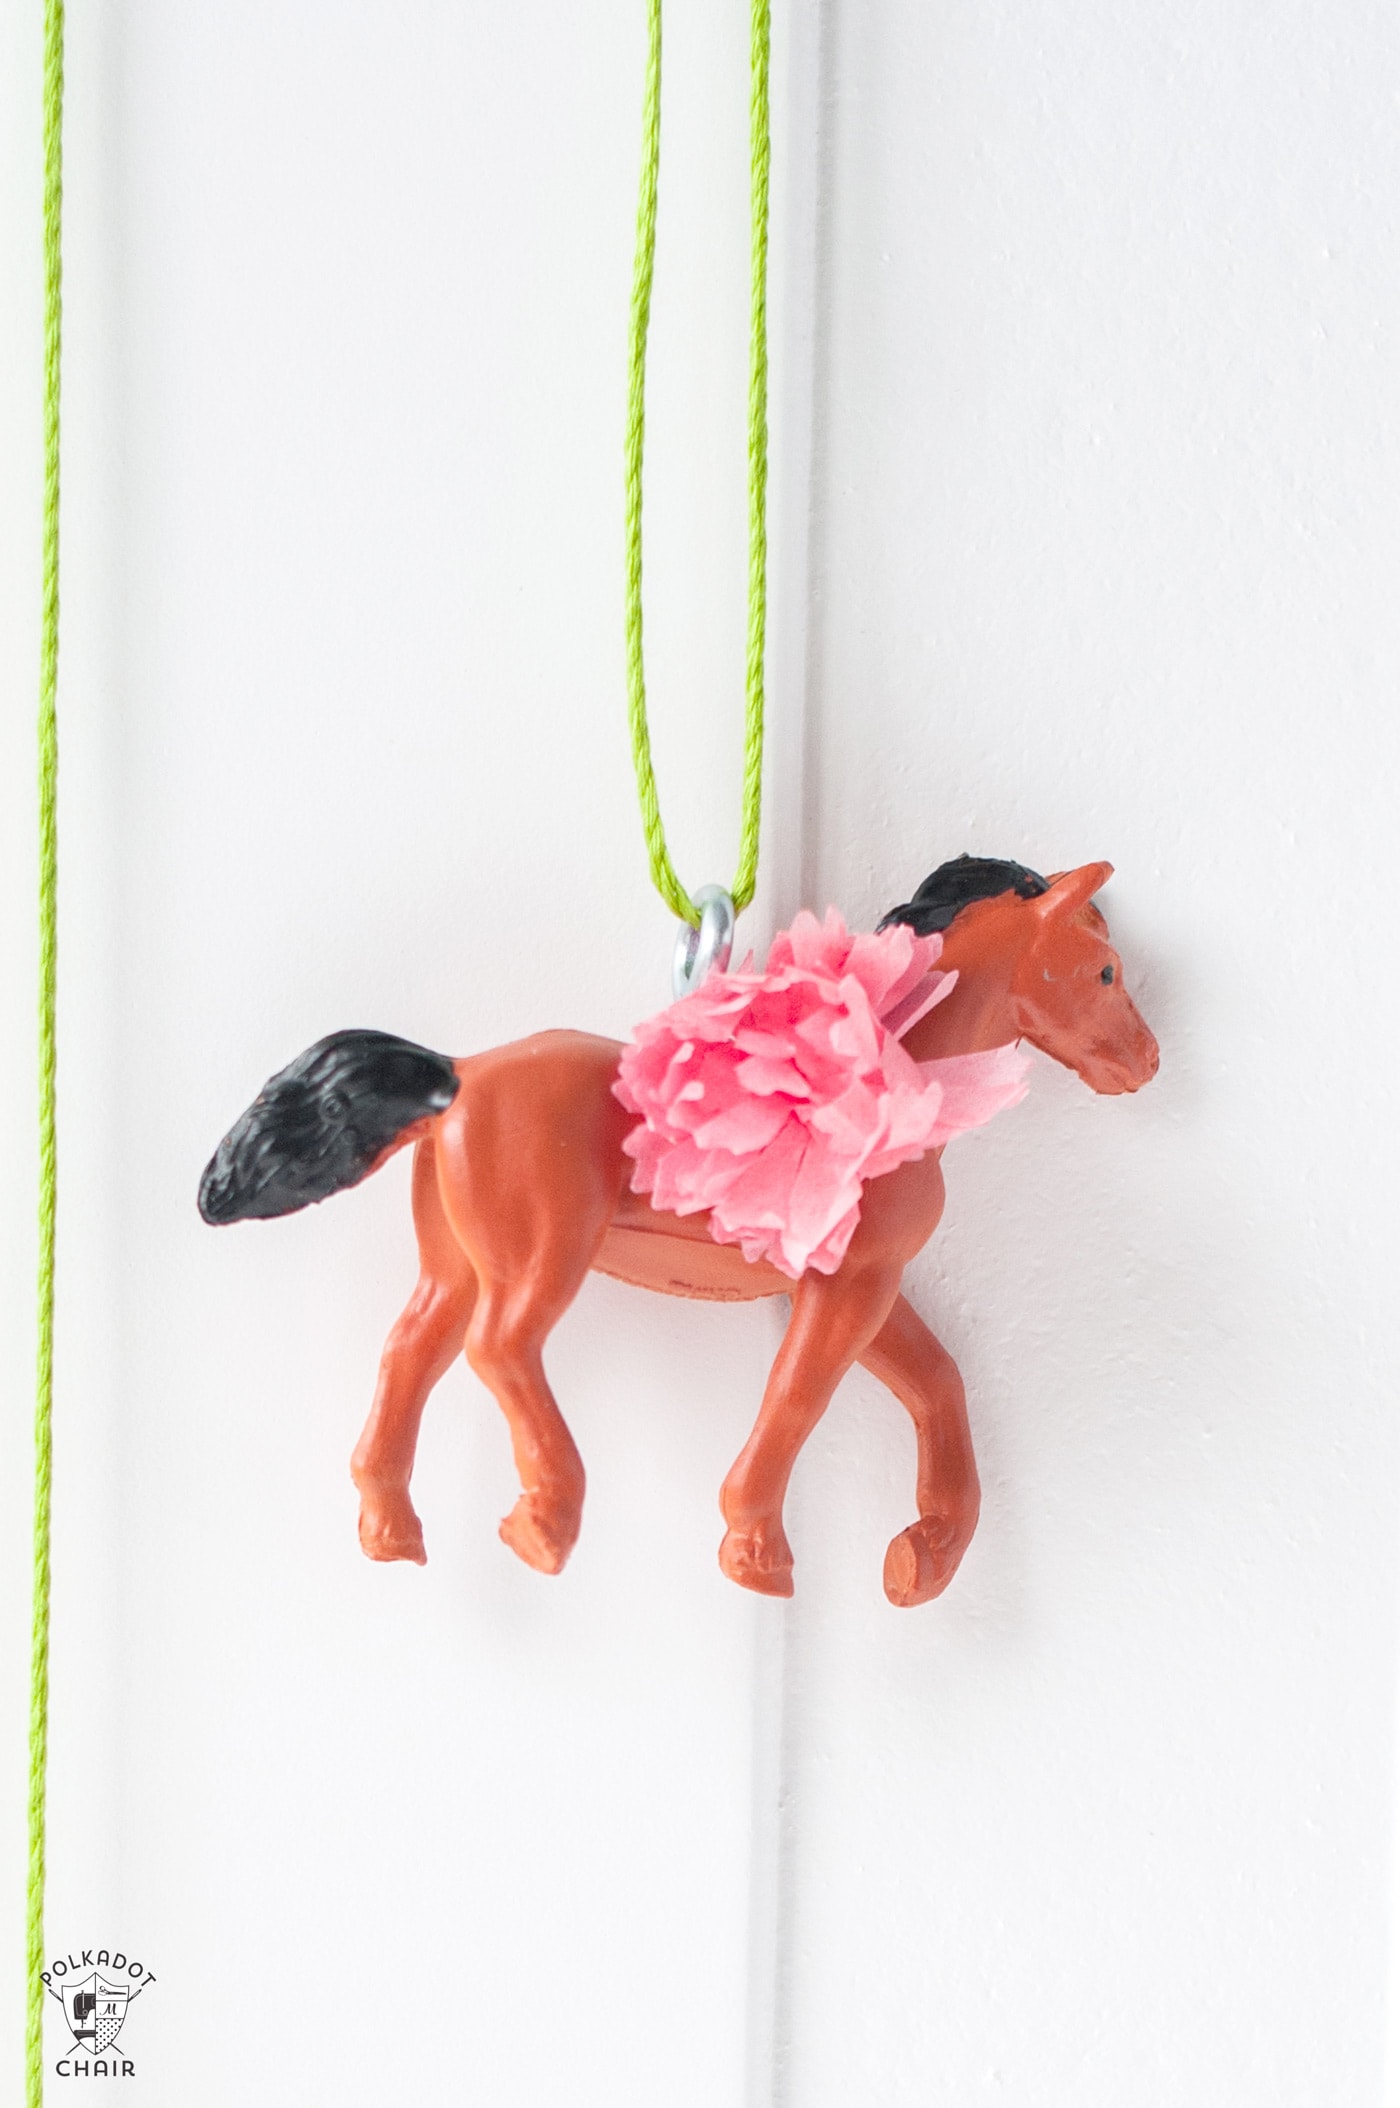 plastic horses on a table with paper flowers